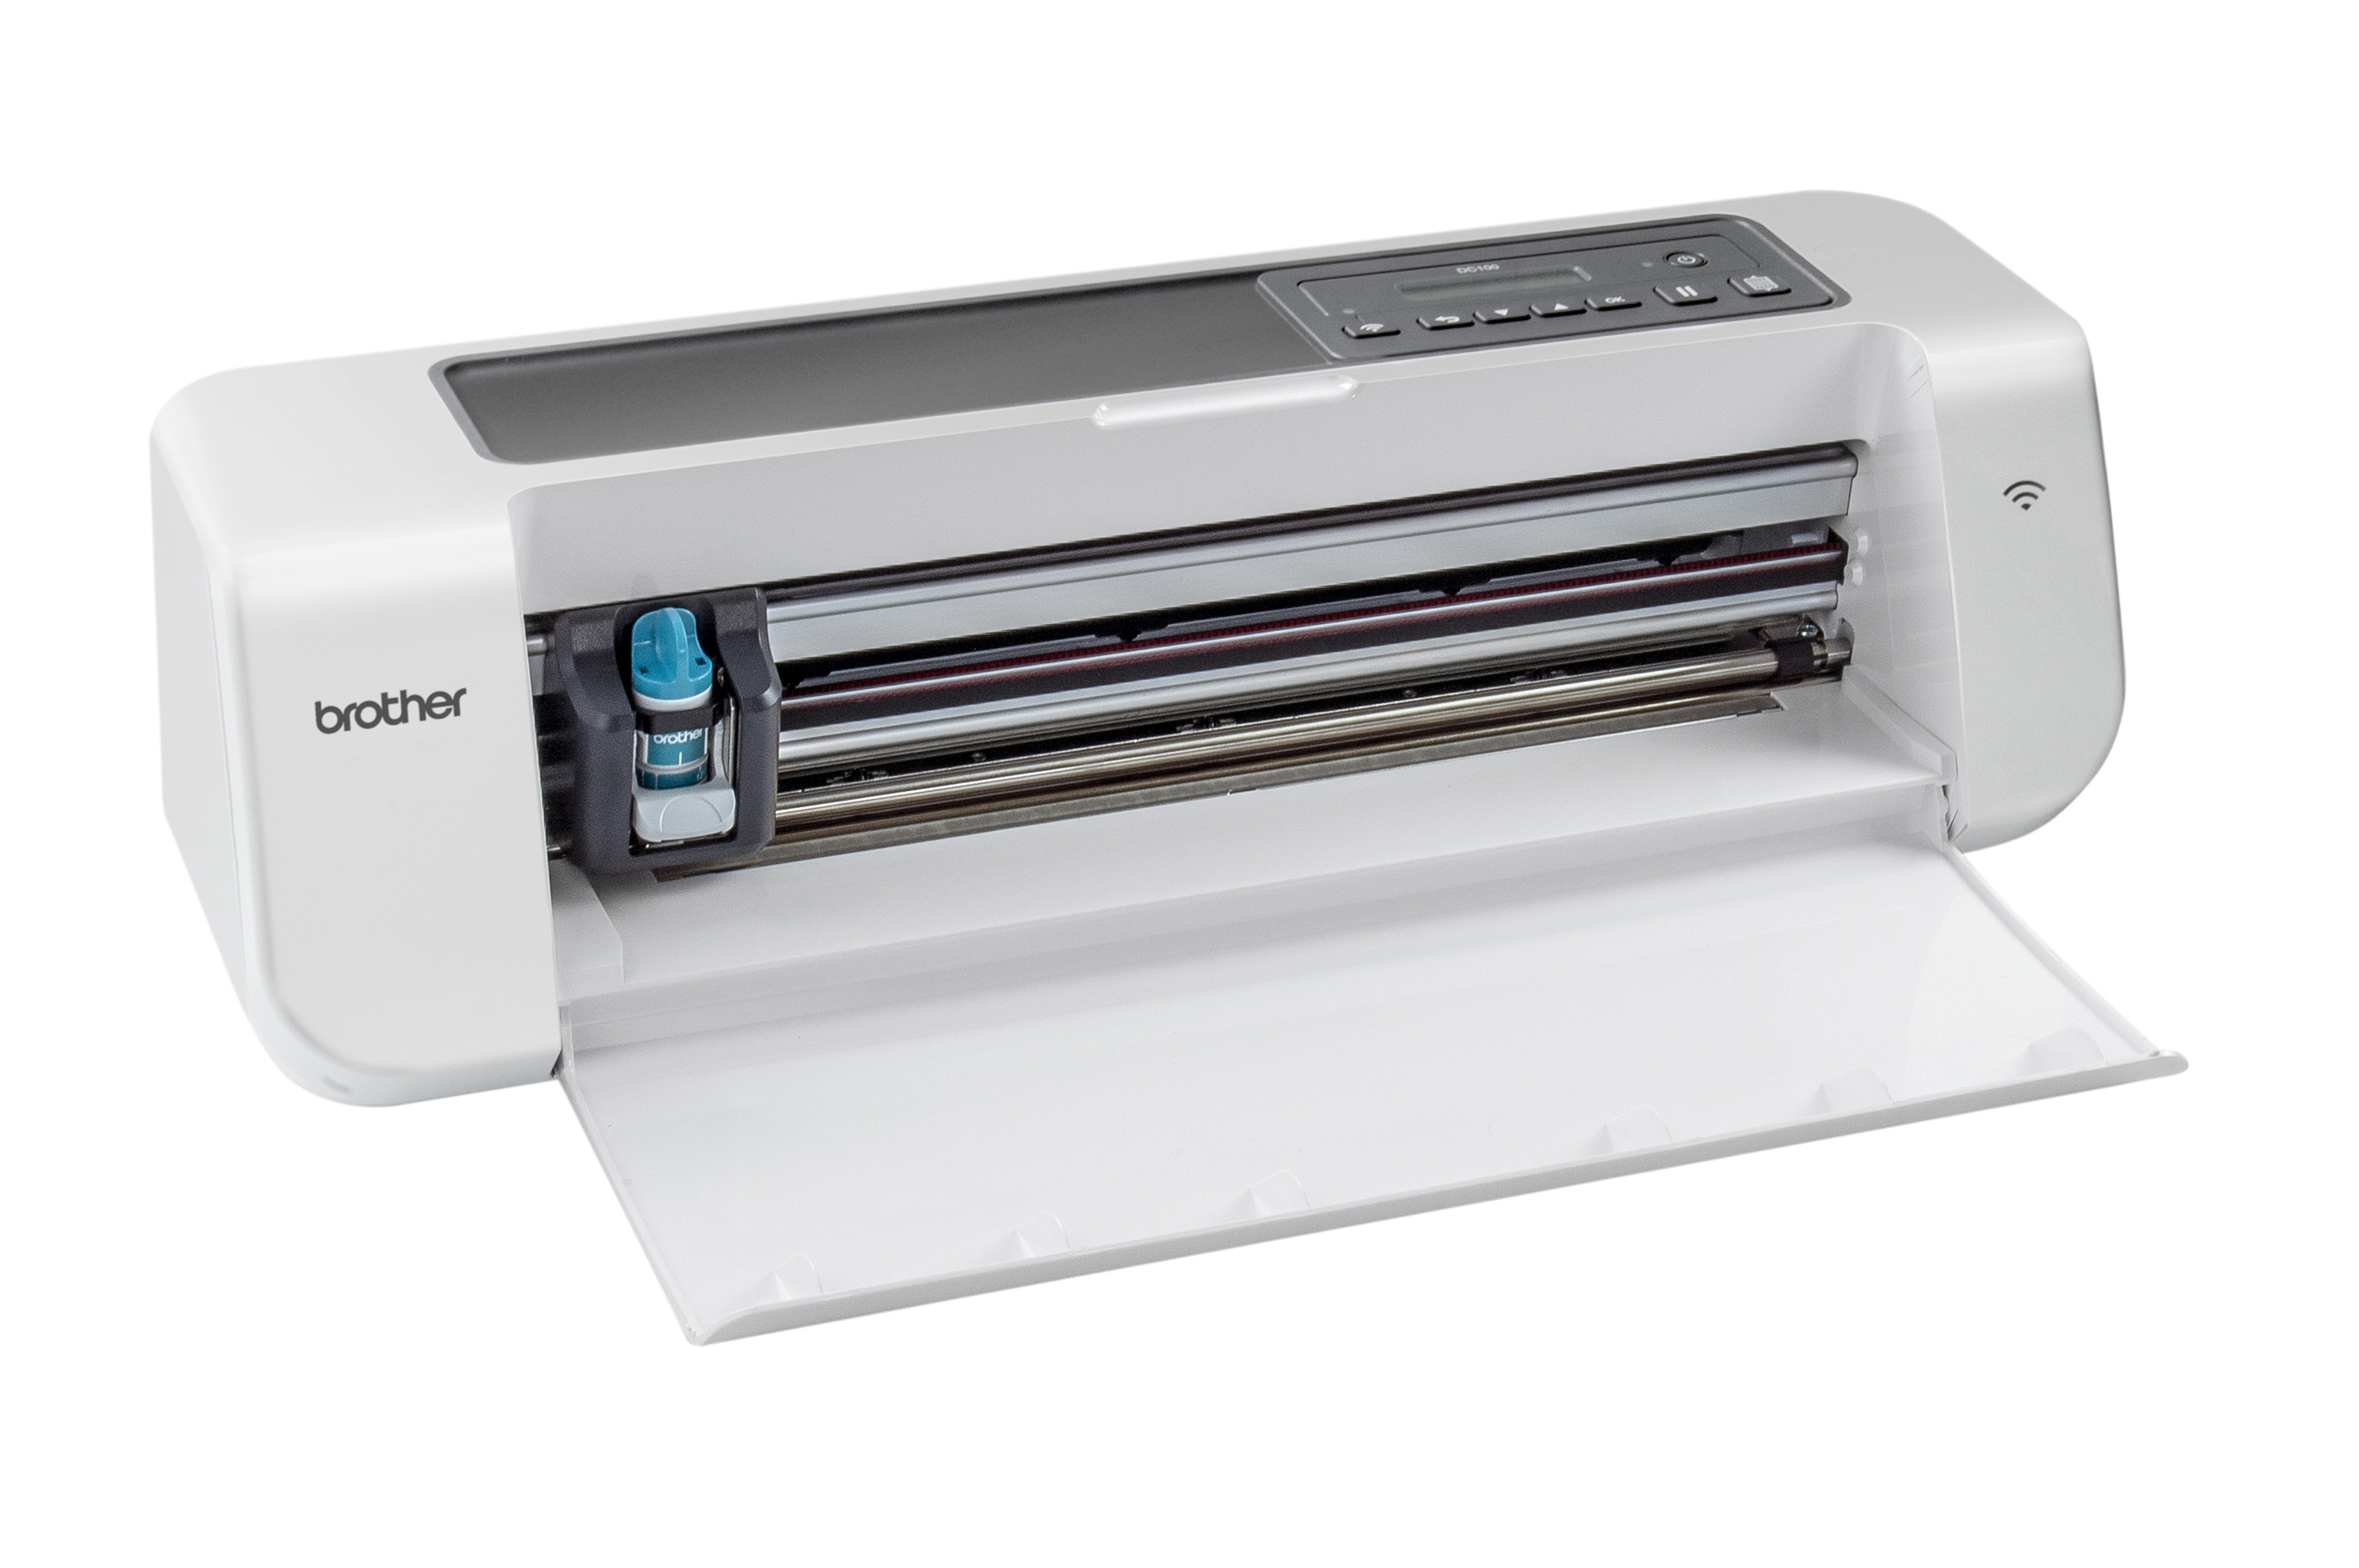 DC100 BROTHER DesignNCut Plotter